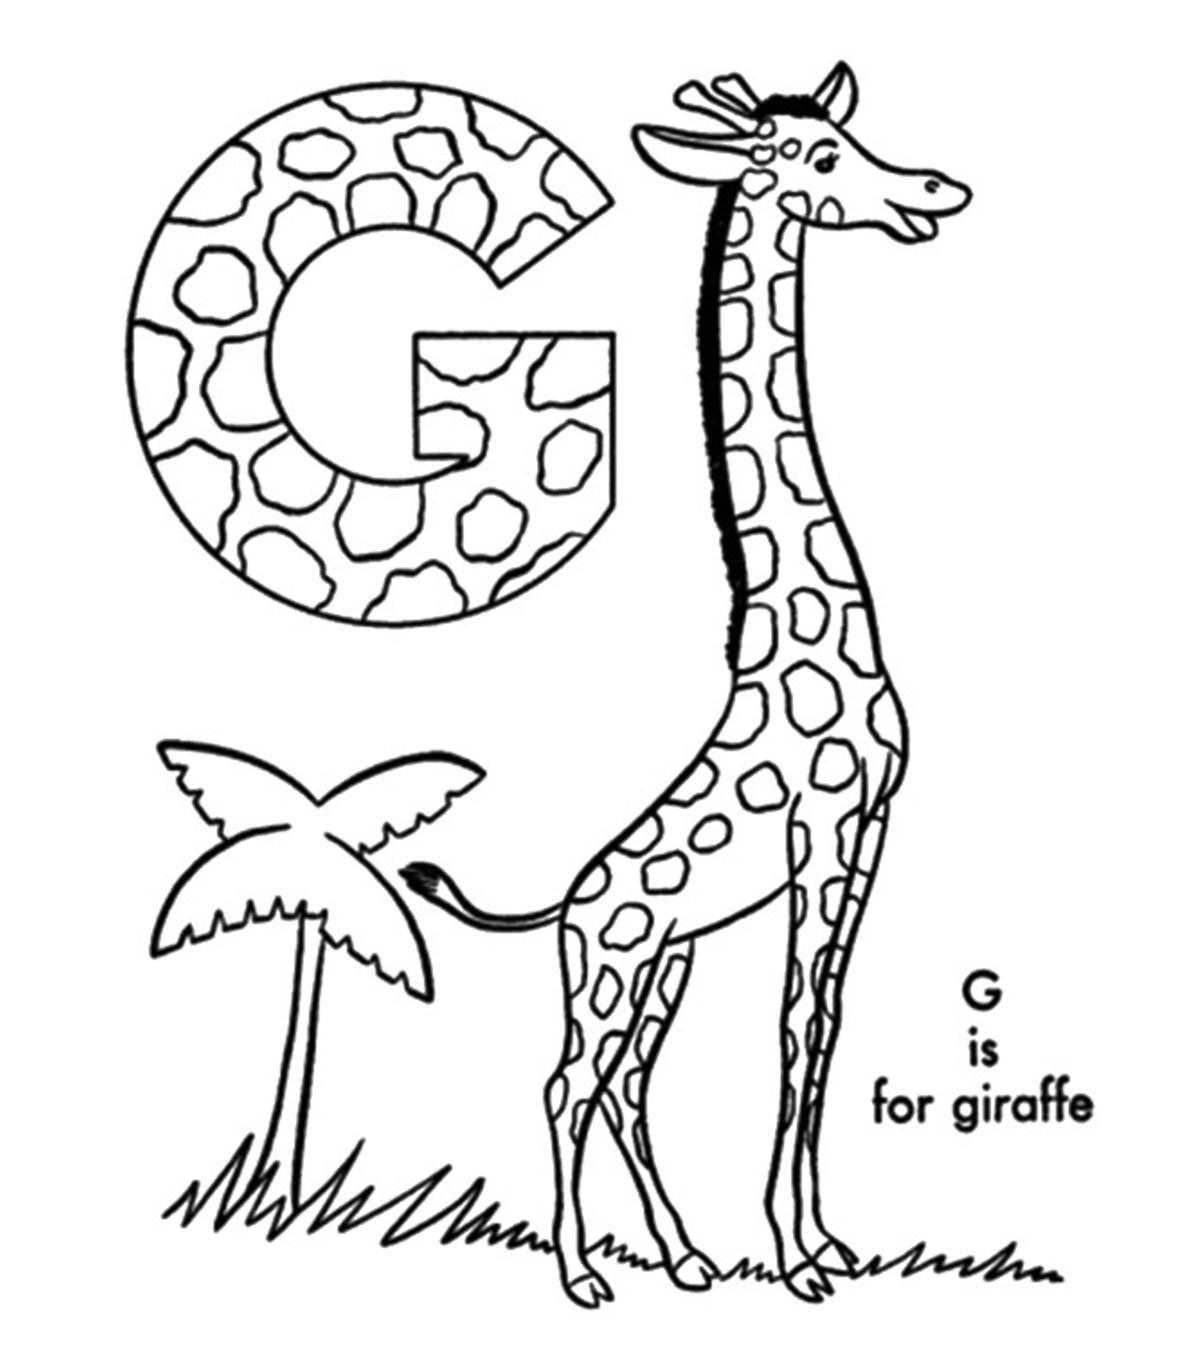 Top 25 Letter ‘G’ Coloring Pages Your Toddler Will Love To Learn & Color